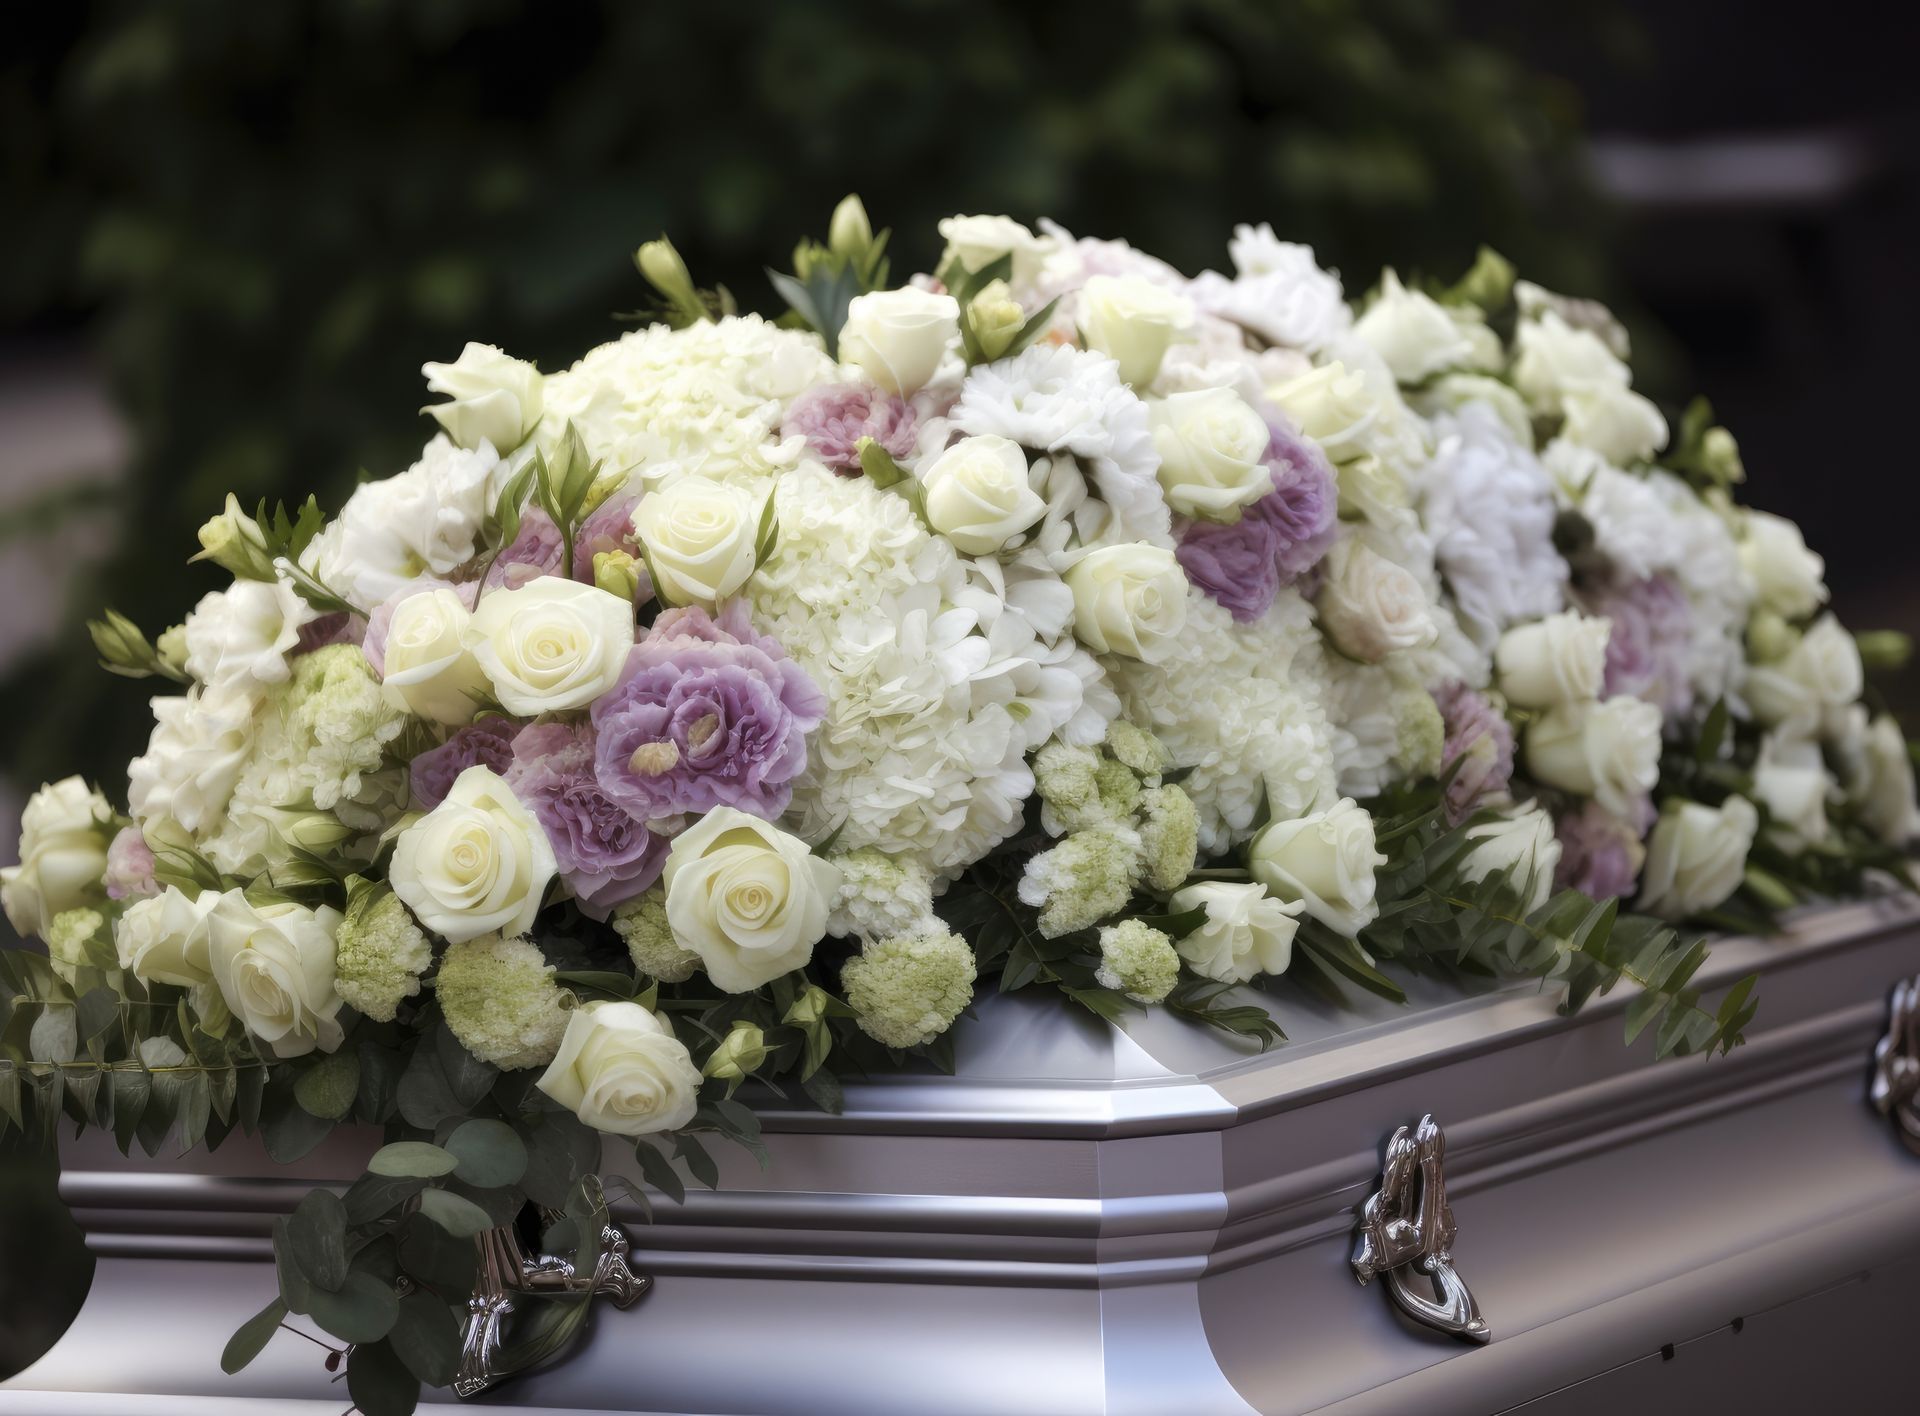 a silver coffin covered in white and purple flowers